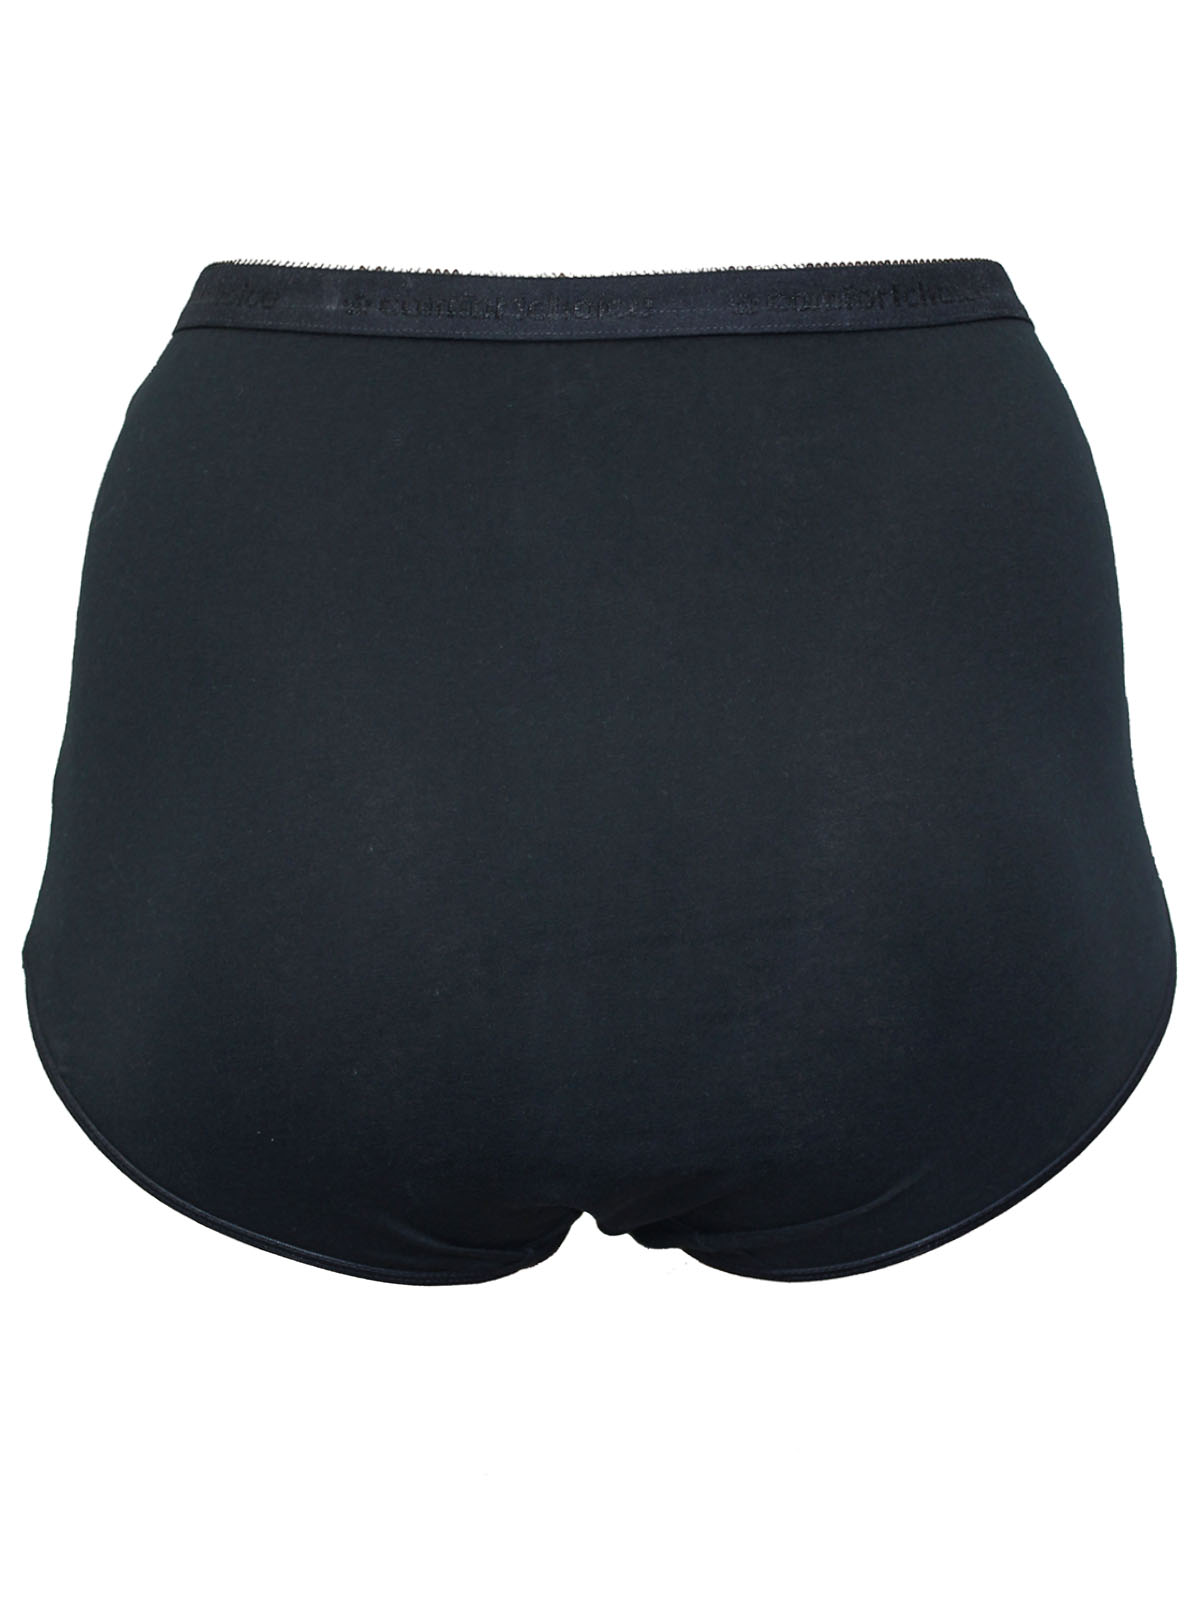 Comfort Choice - - Comfort Choice BLACK Pure Cotton High Waisted Full Briefs  - Plus Size 12 to 42/4